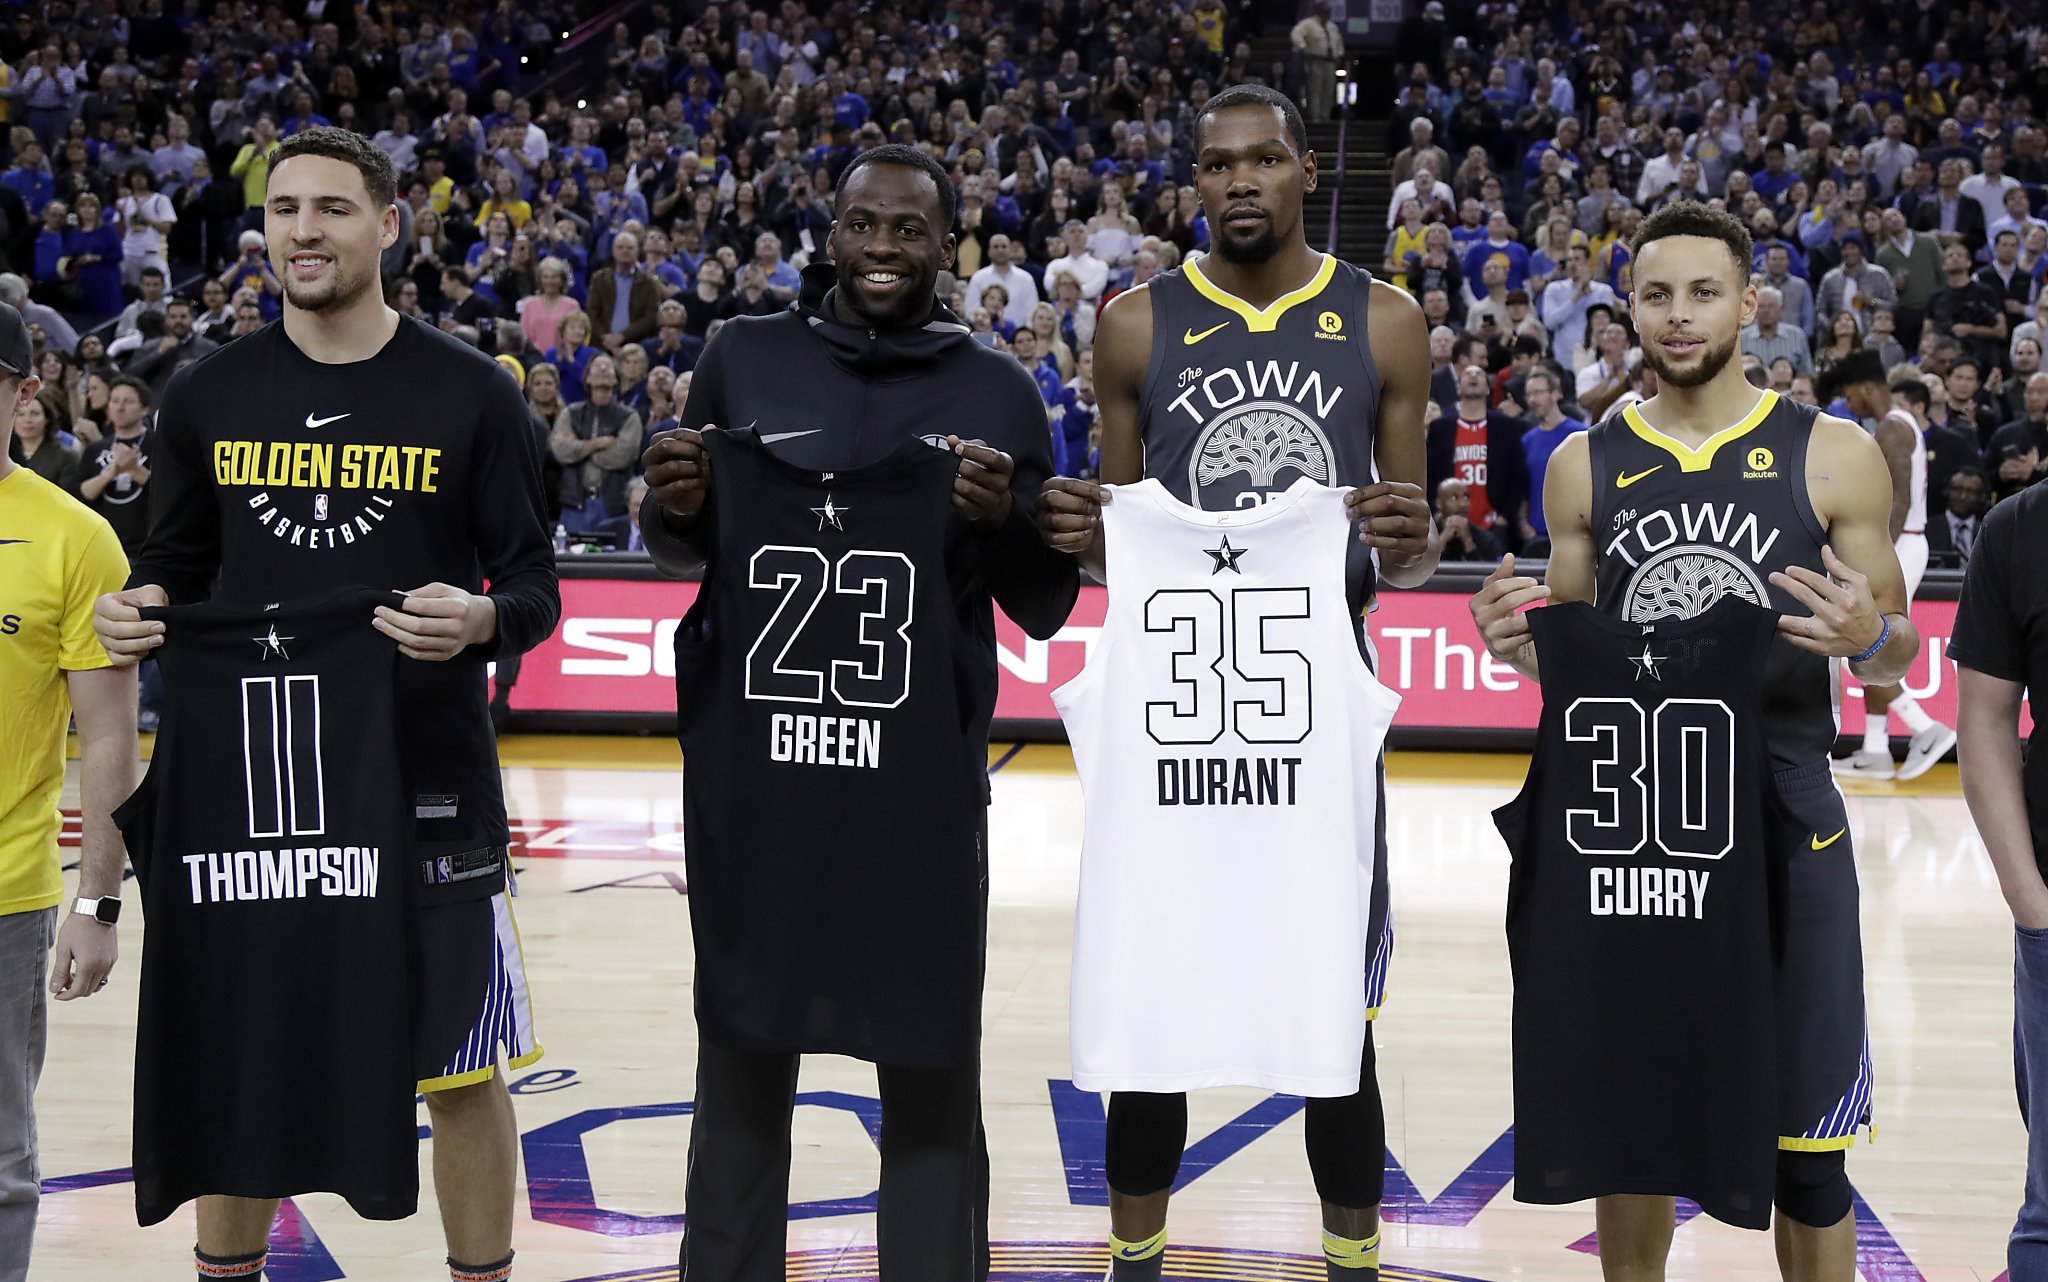 Warriors’ 4 AllStars try not to overload themselves in Los Angeles